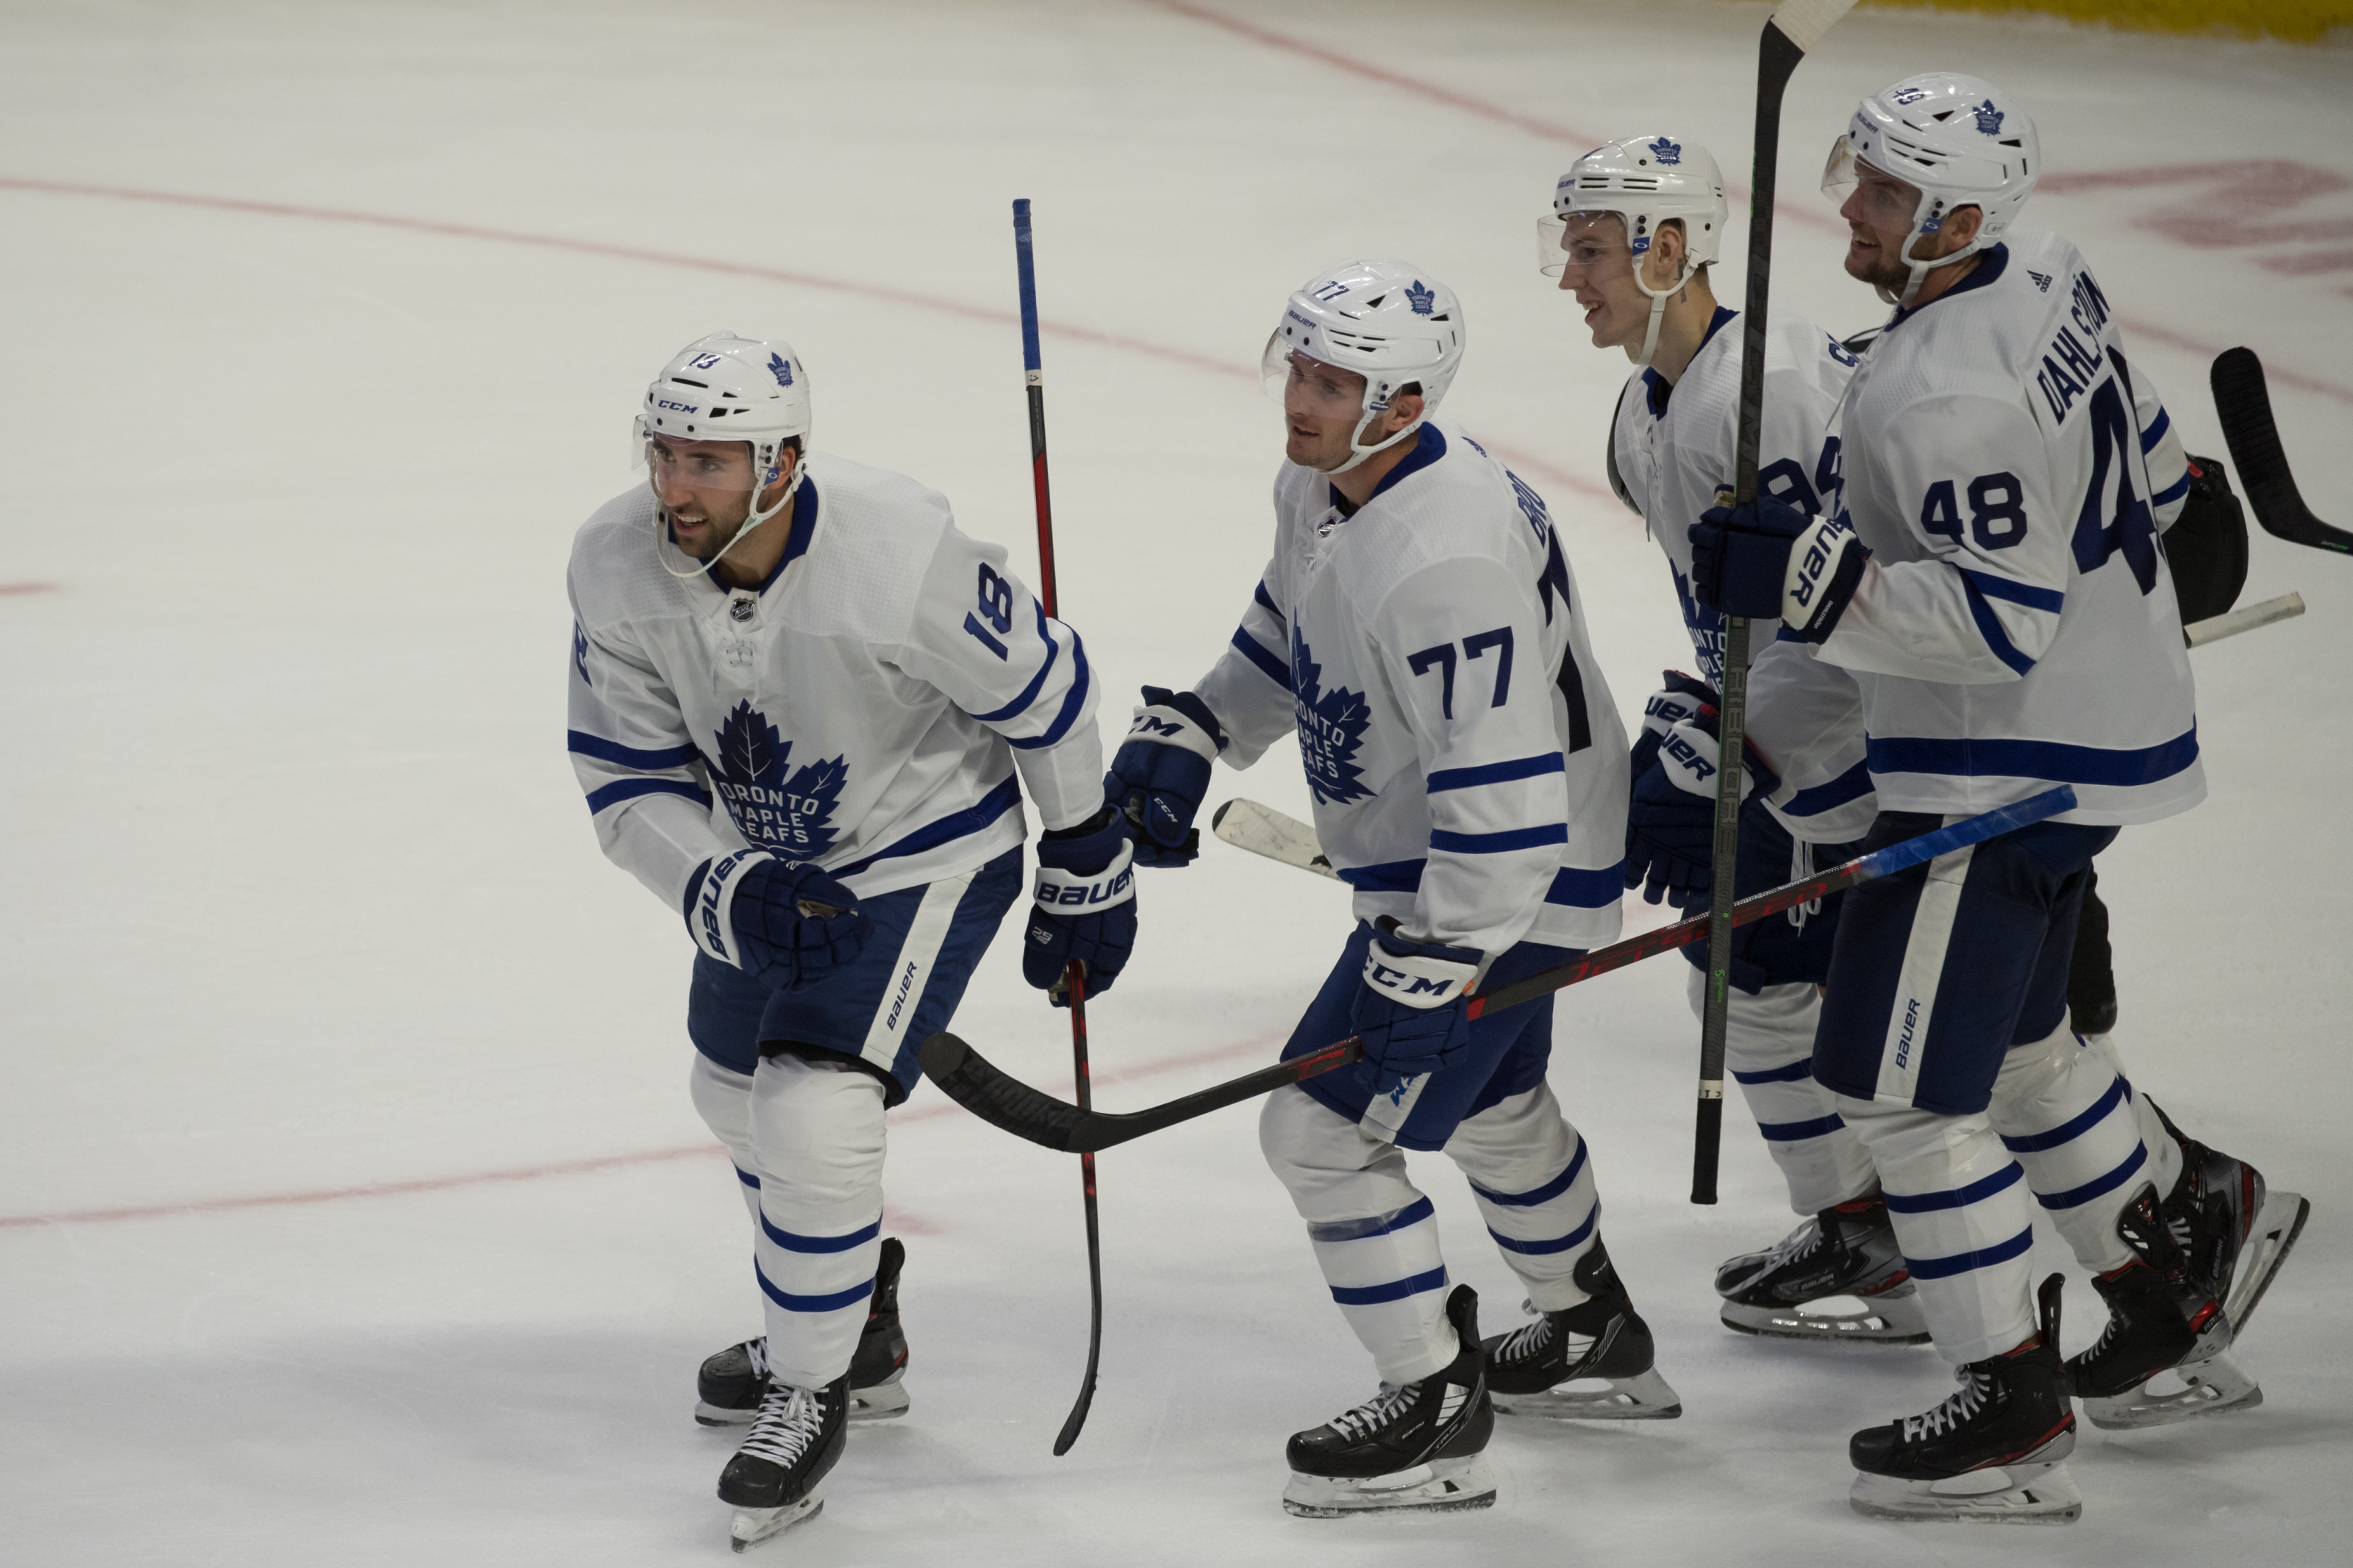 Toronto Maple Leafs: Sandin sent to Marlies, roster trimmed further